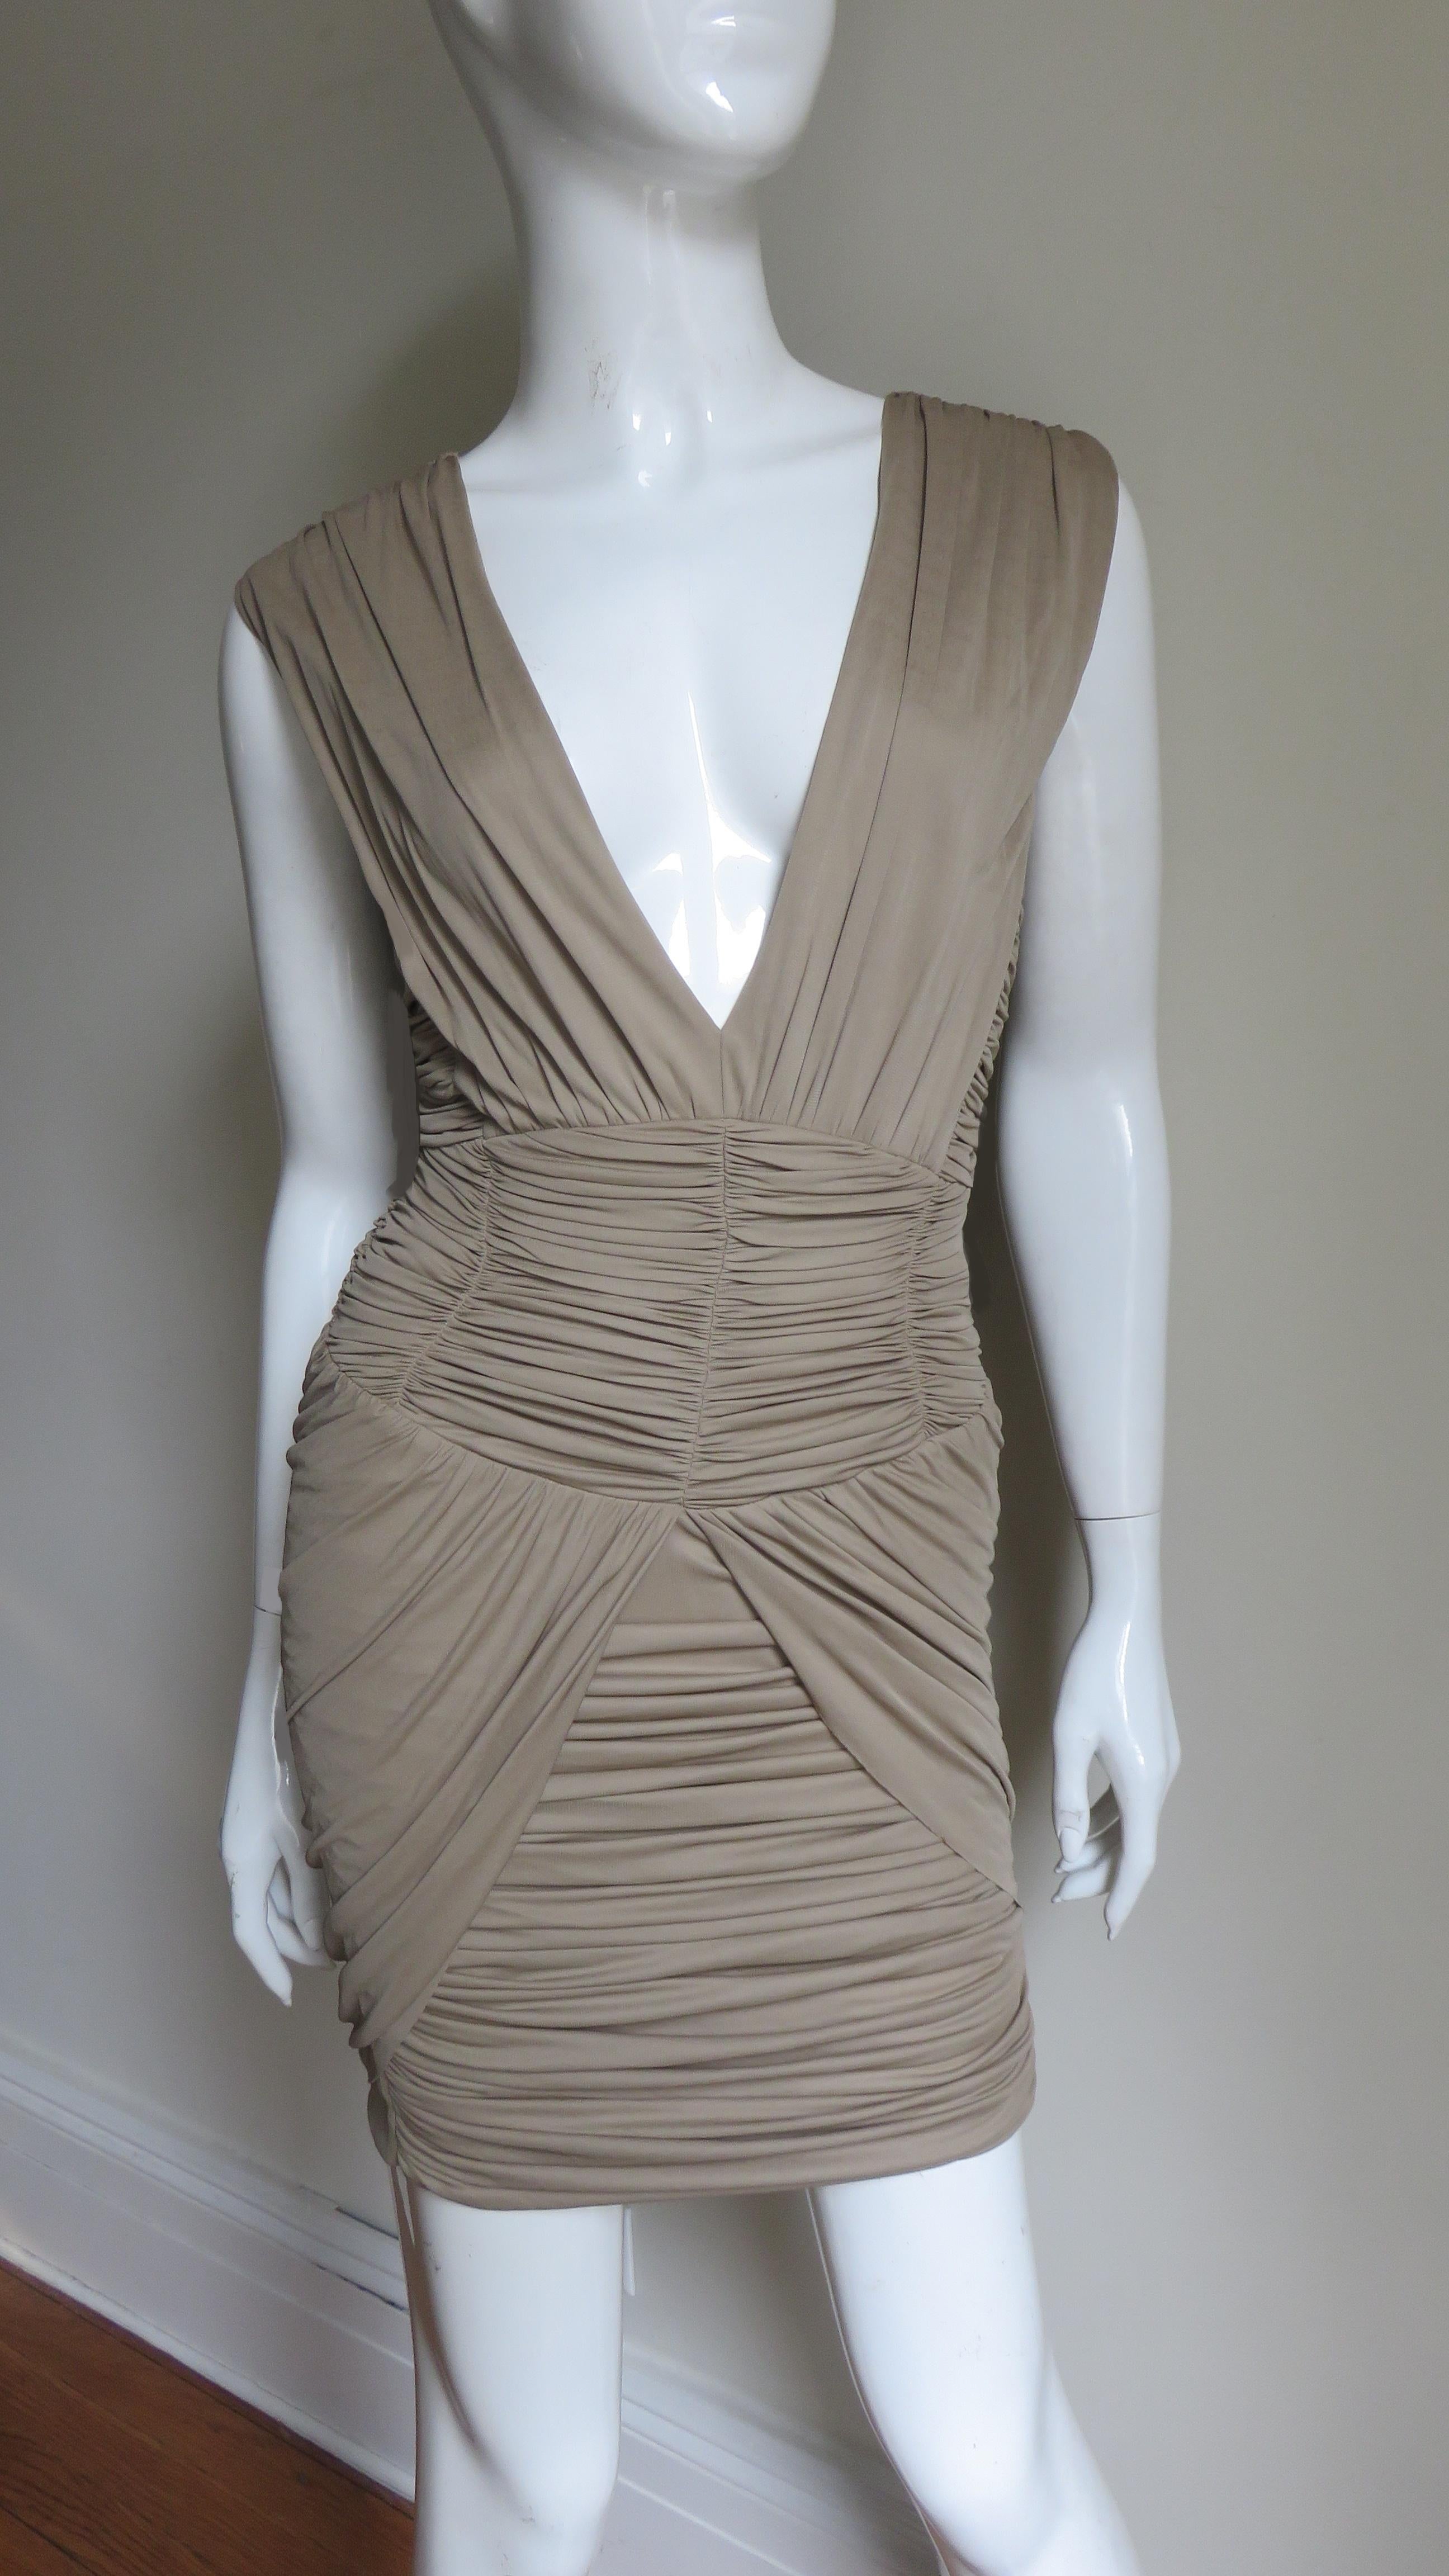 A fabulous taupe fine silk jersey dress from Balmain.  It has a plunging neckline framed by shoulder to waist length ruched panels.  The waist is fitted with horizontally ruched panels and there is draping on either side of the horizontally ruched